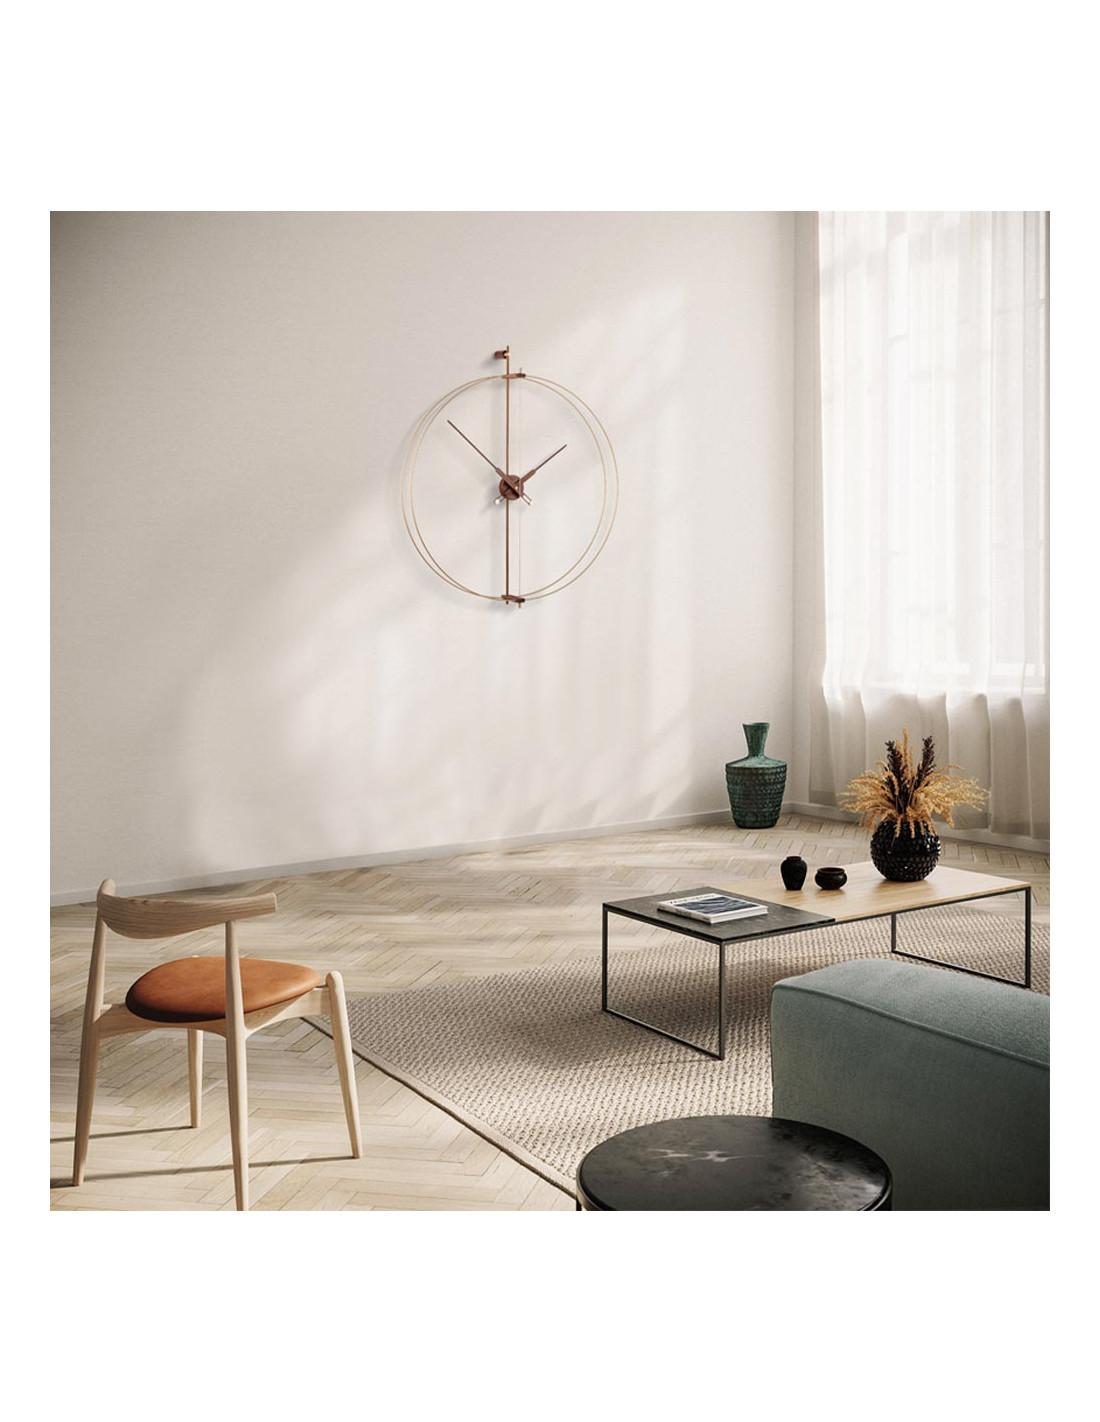 The modern Barcelona Premium watch incorporates a more glamorous point in its design, and stands out for the brass finish of its double fiberglass ring.
Barcelona Premium wall clock : Rings in brass finish or in black fiberglass , hands and central